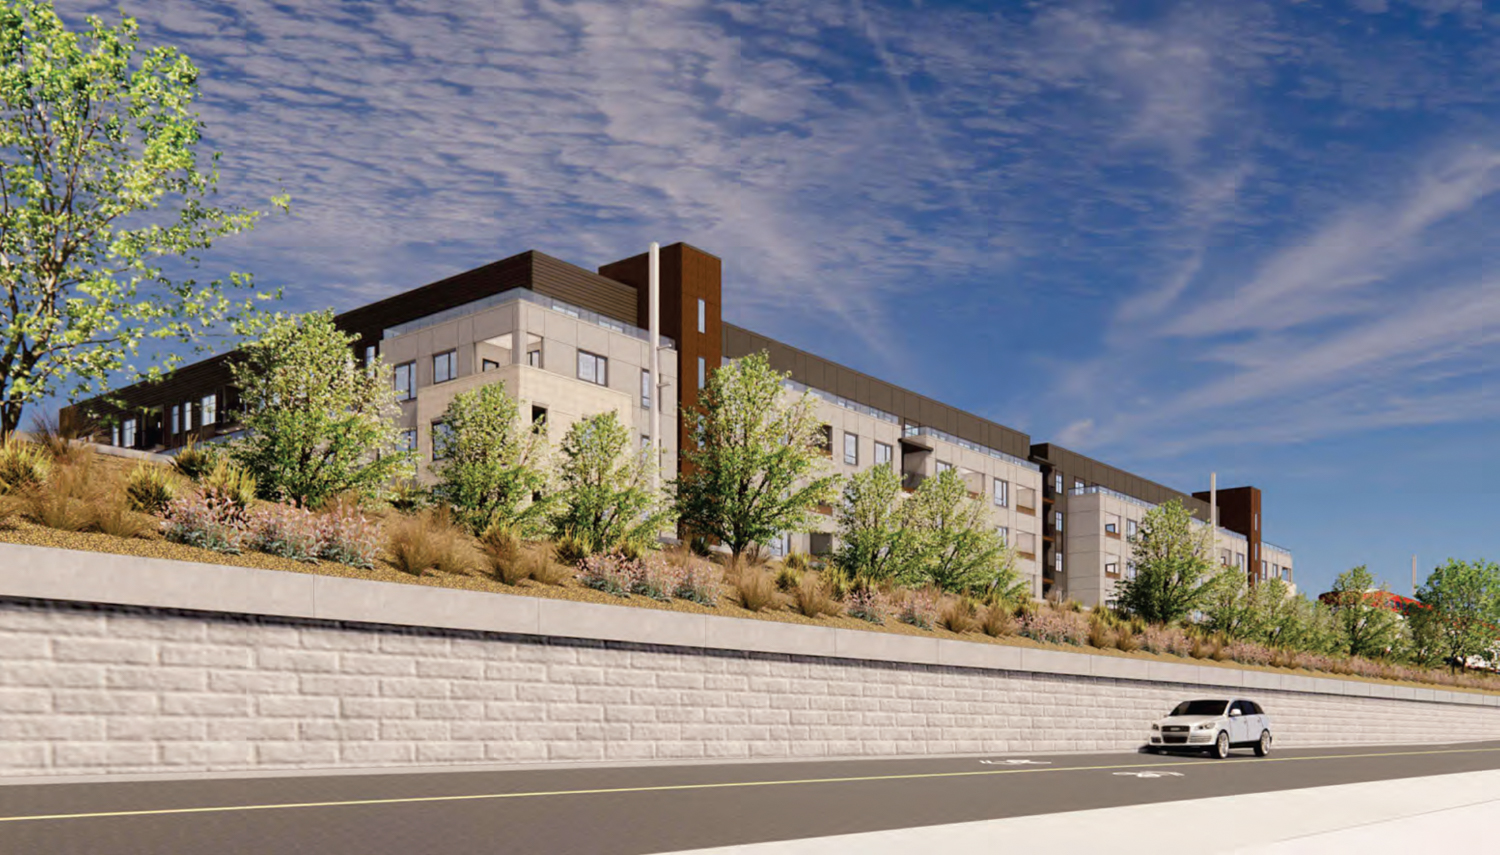 11 El Camino Real seen from Old Country Road, rendering by KTGY